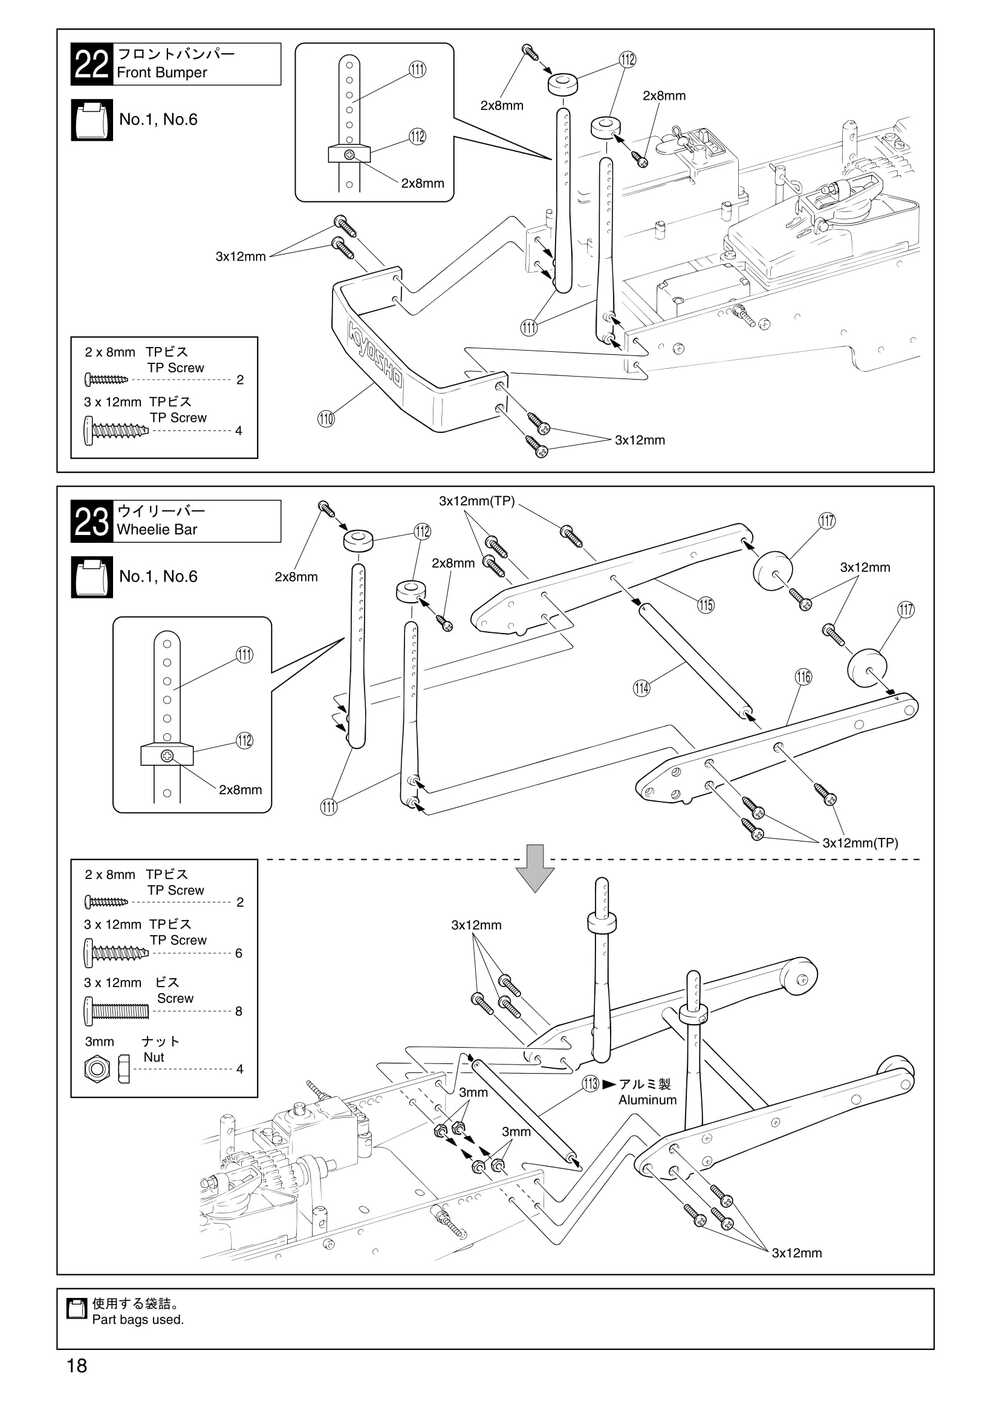 Kyosho - 31221 - Mad-Force - Manual - Page 18